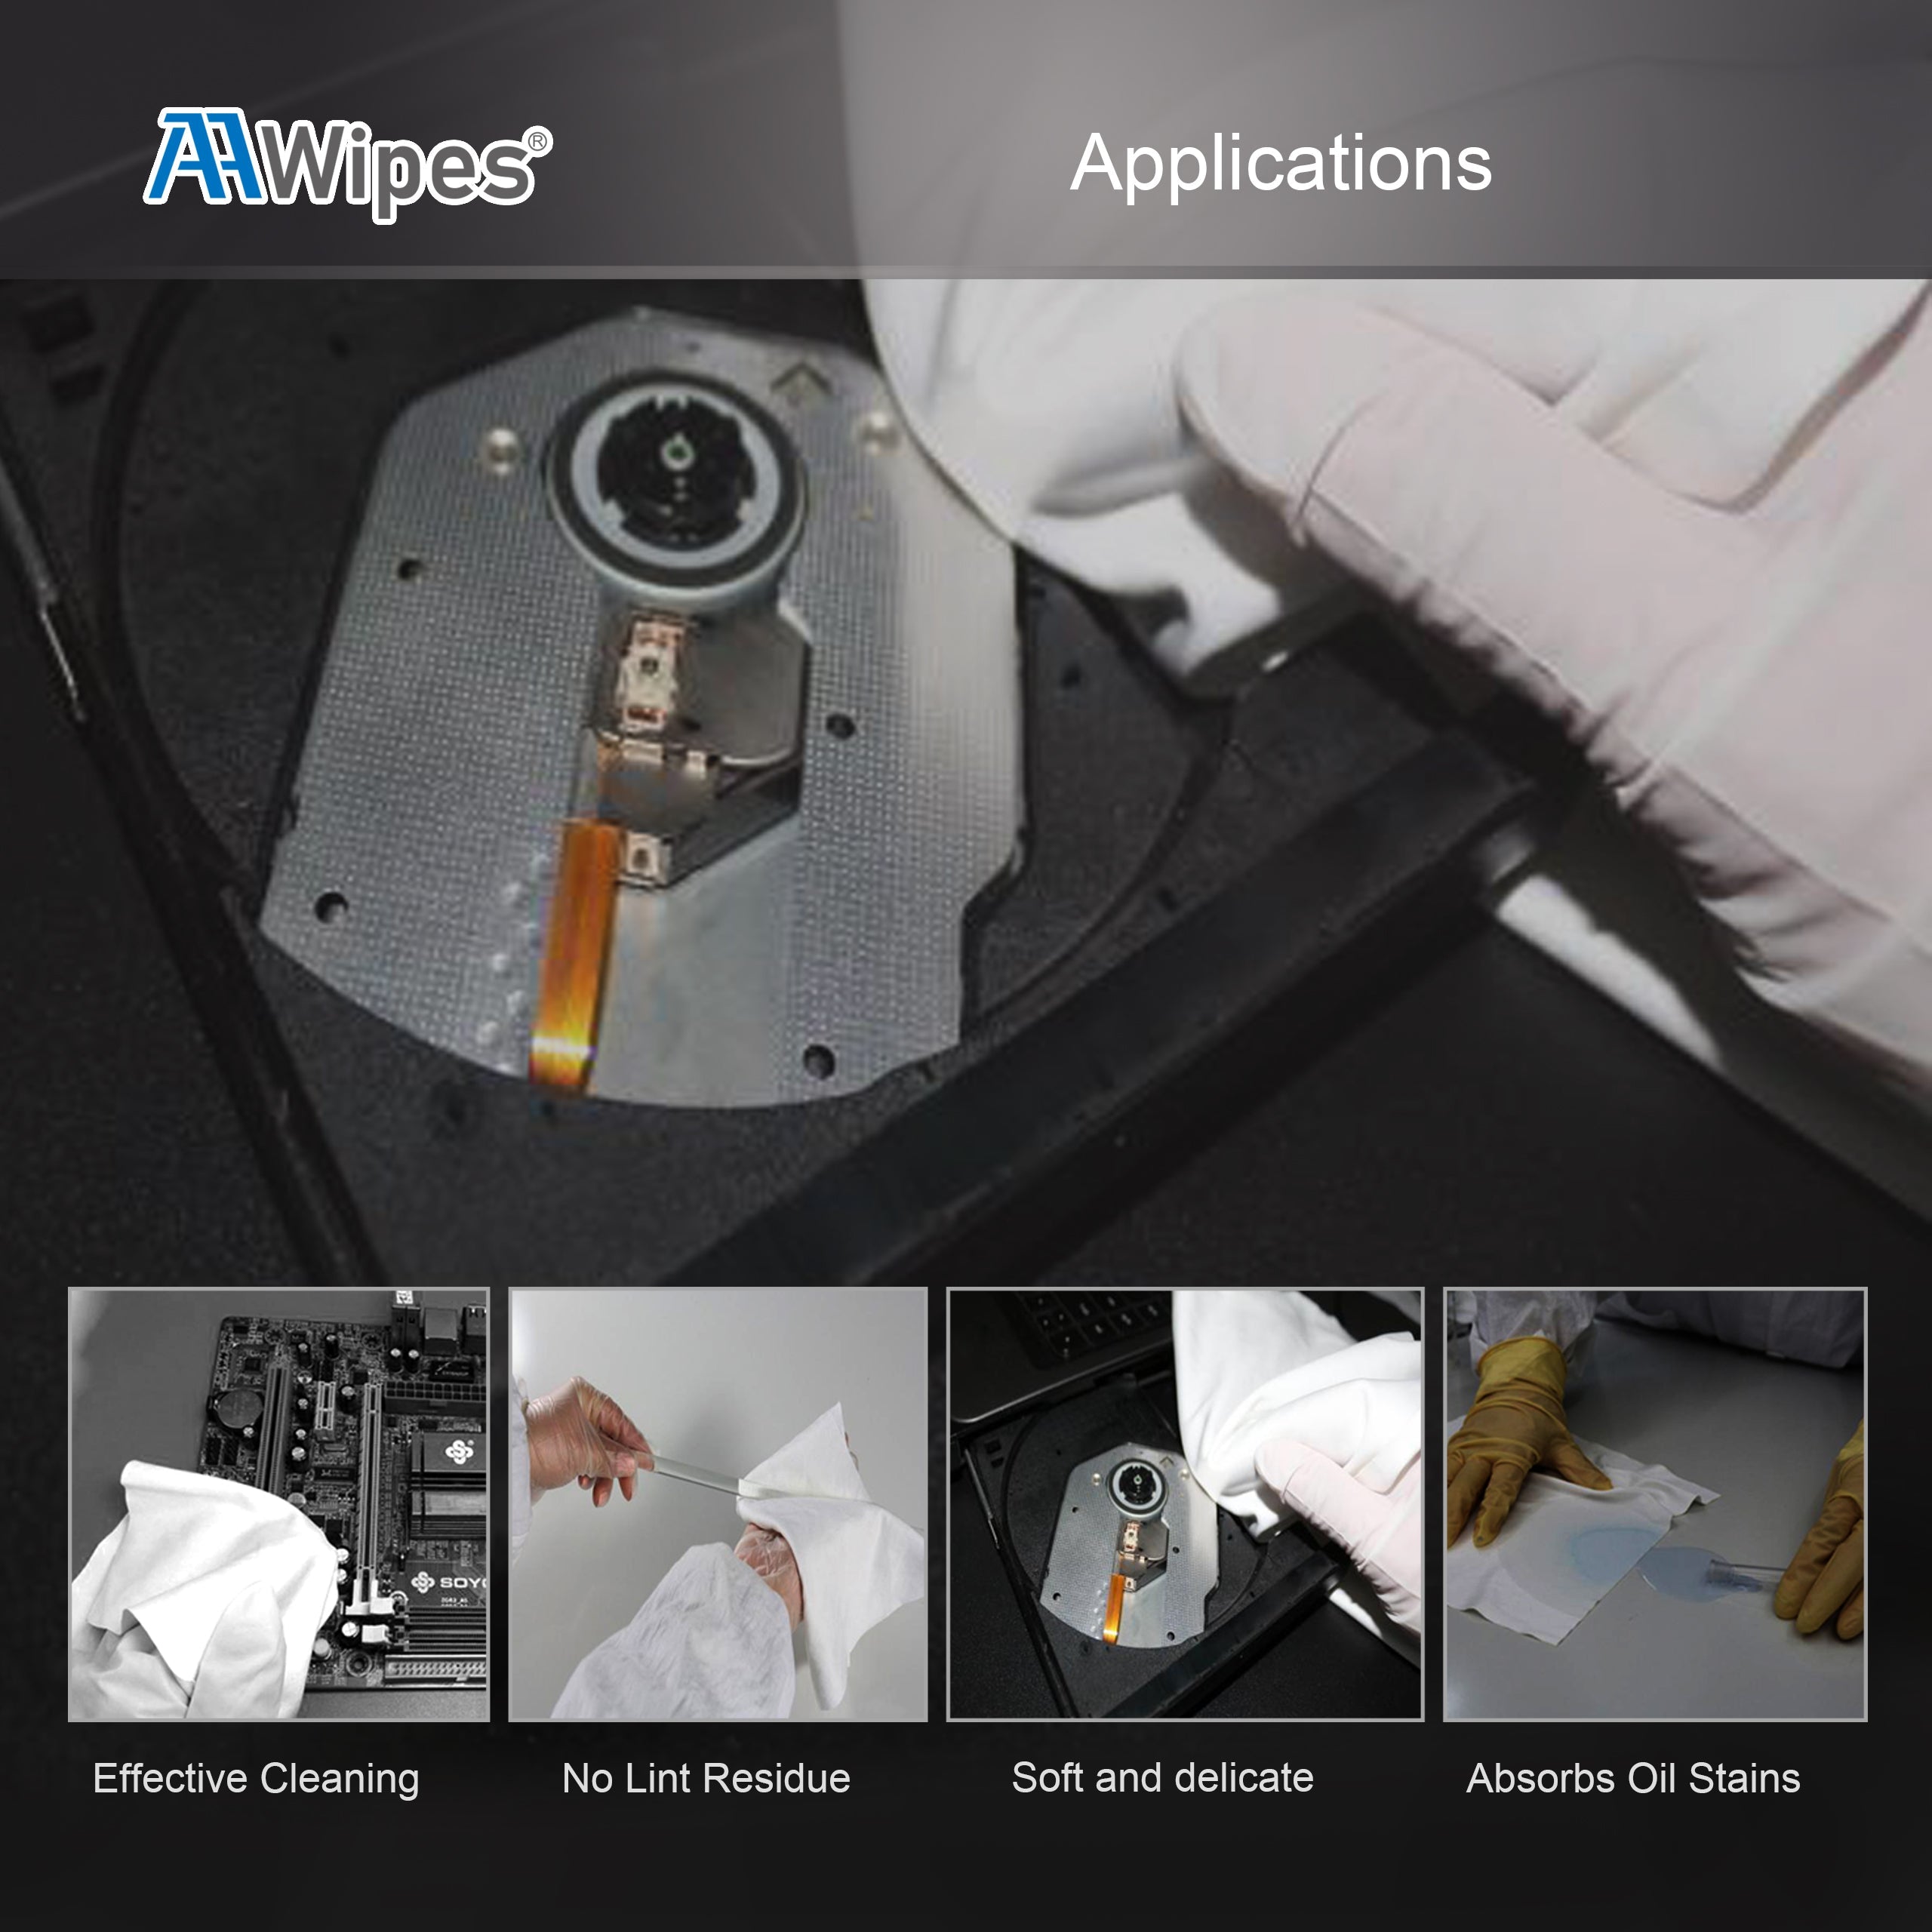 Aawipes cleanroom wipes are designed for a diverse array of cleaning applications from automotive and manufacturing to cleanroom and laboratory settings etc